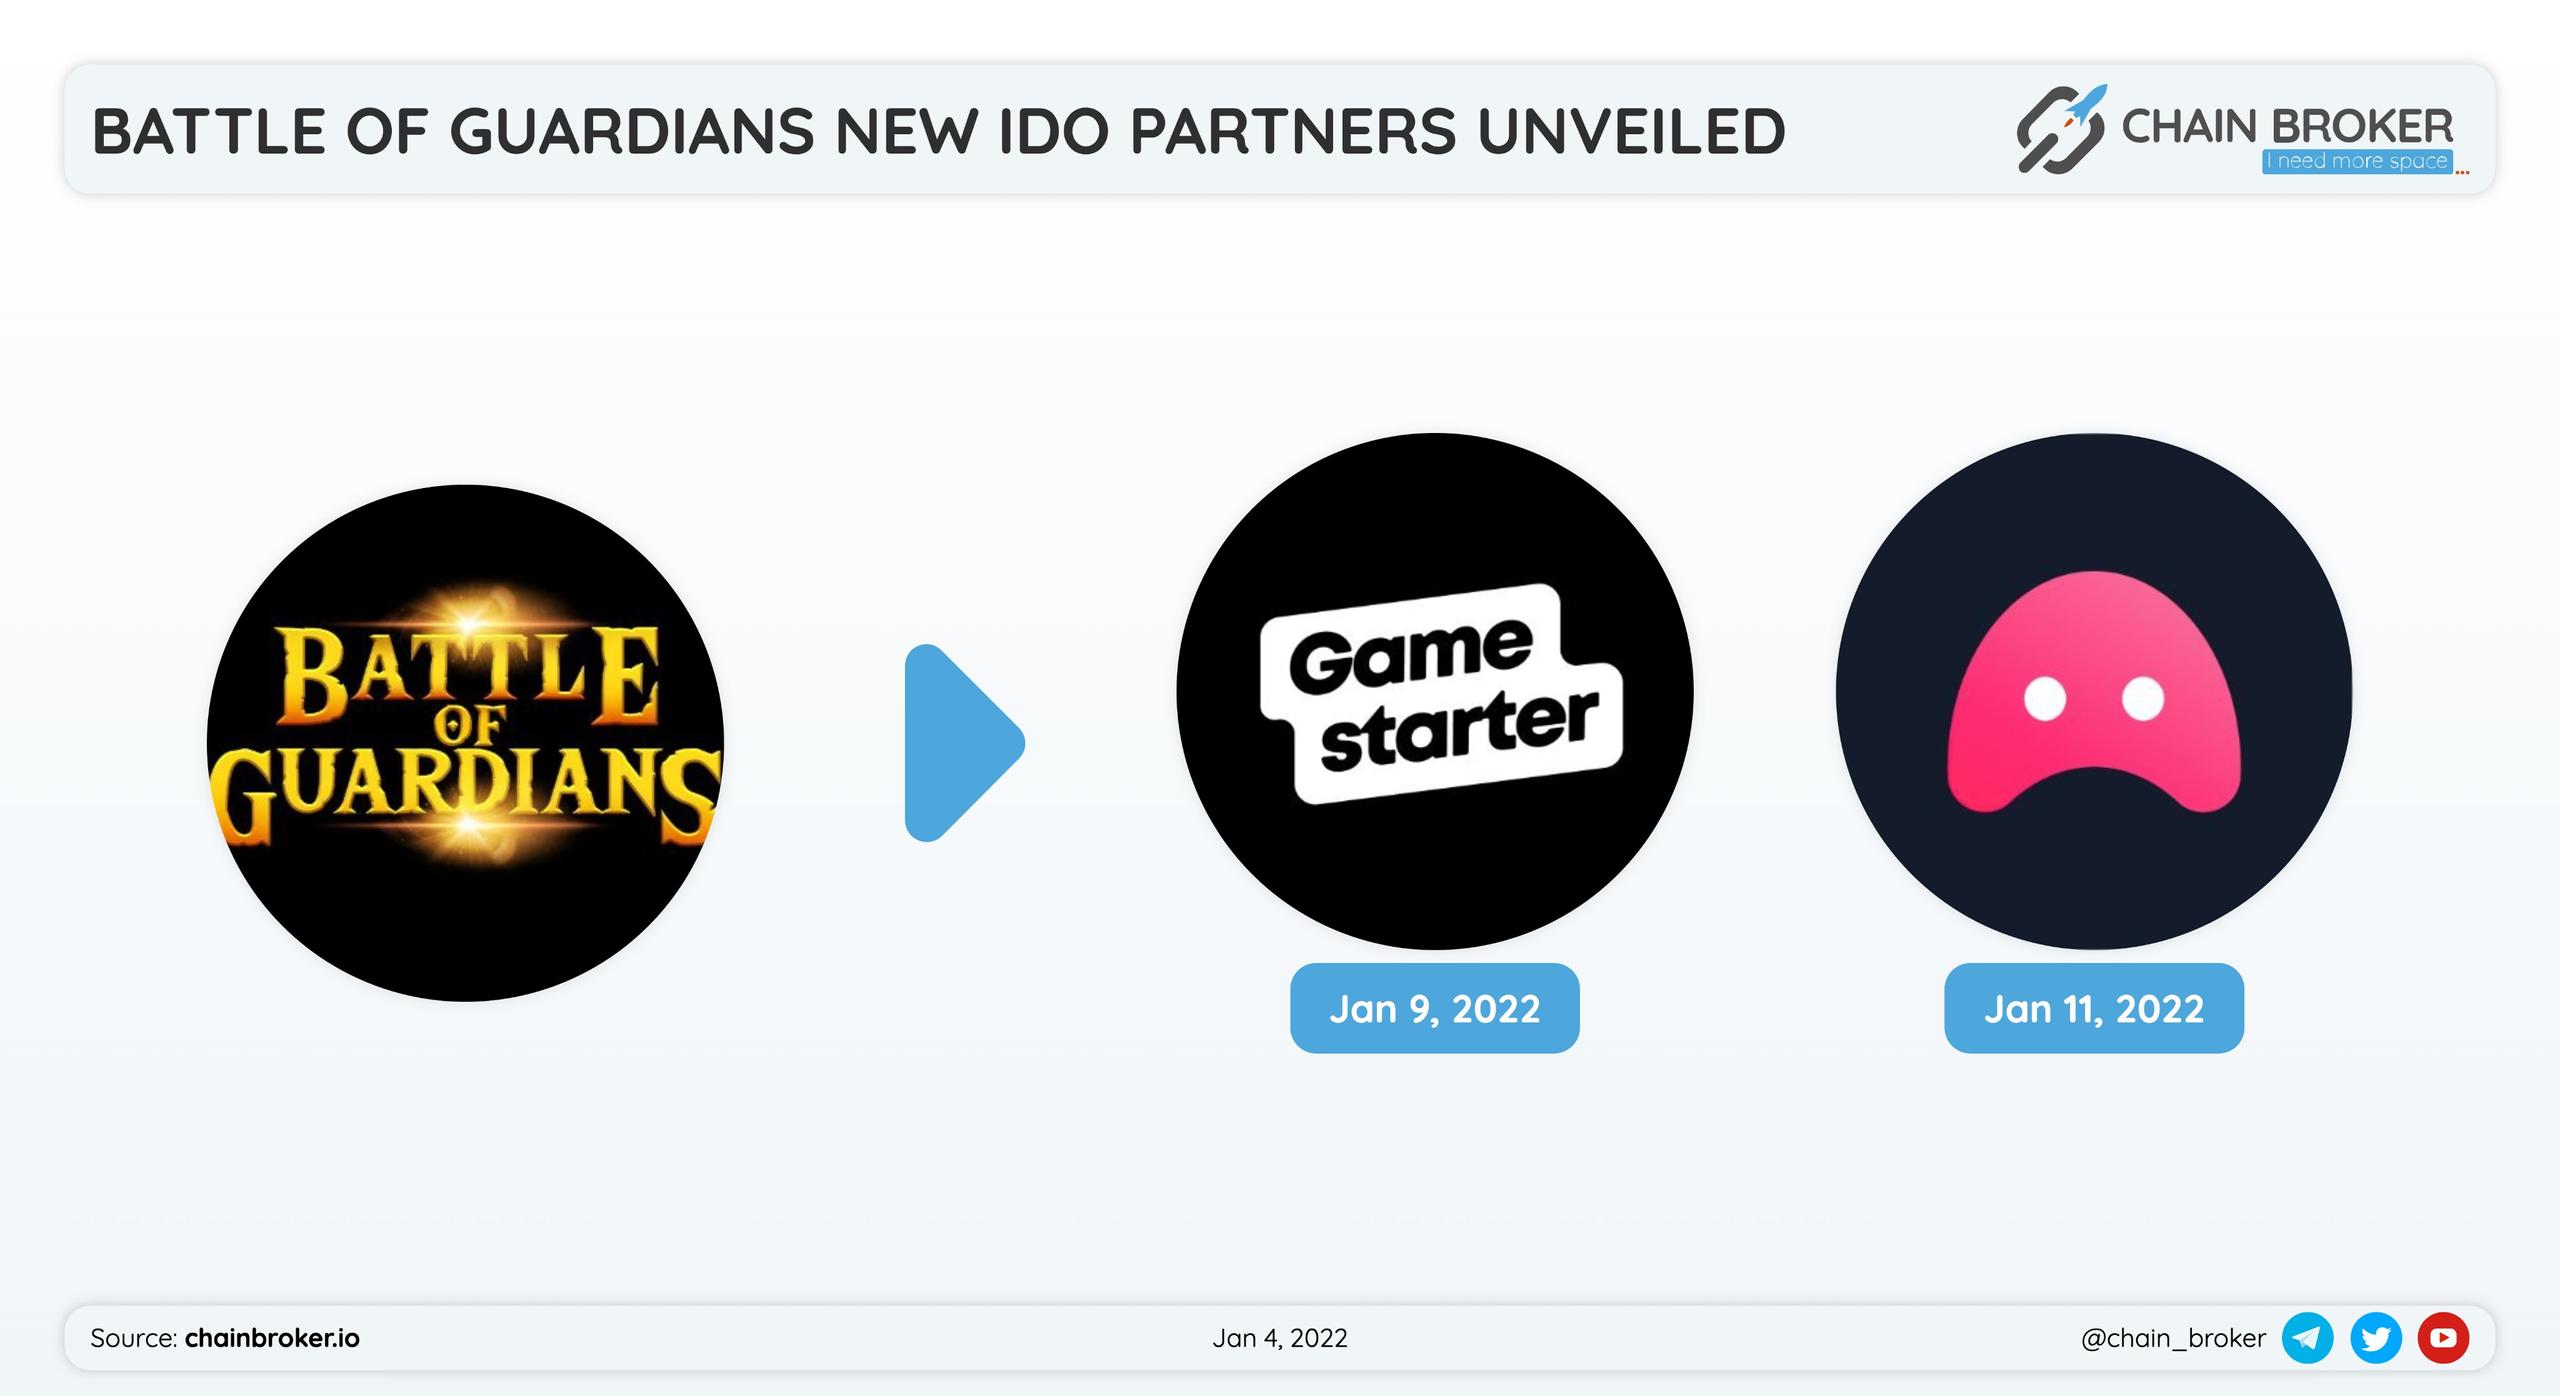 Battle of Guardians has partnered with MetaversePad and Gamestarter for a token launch.